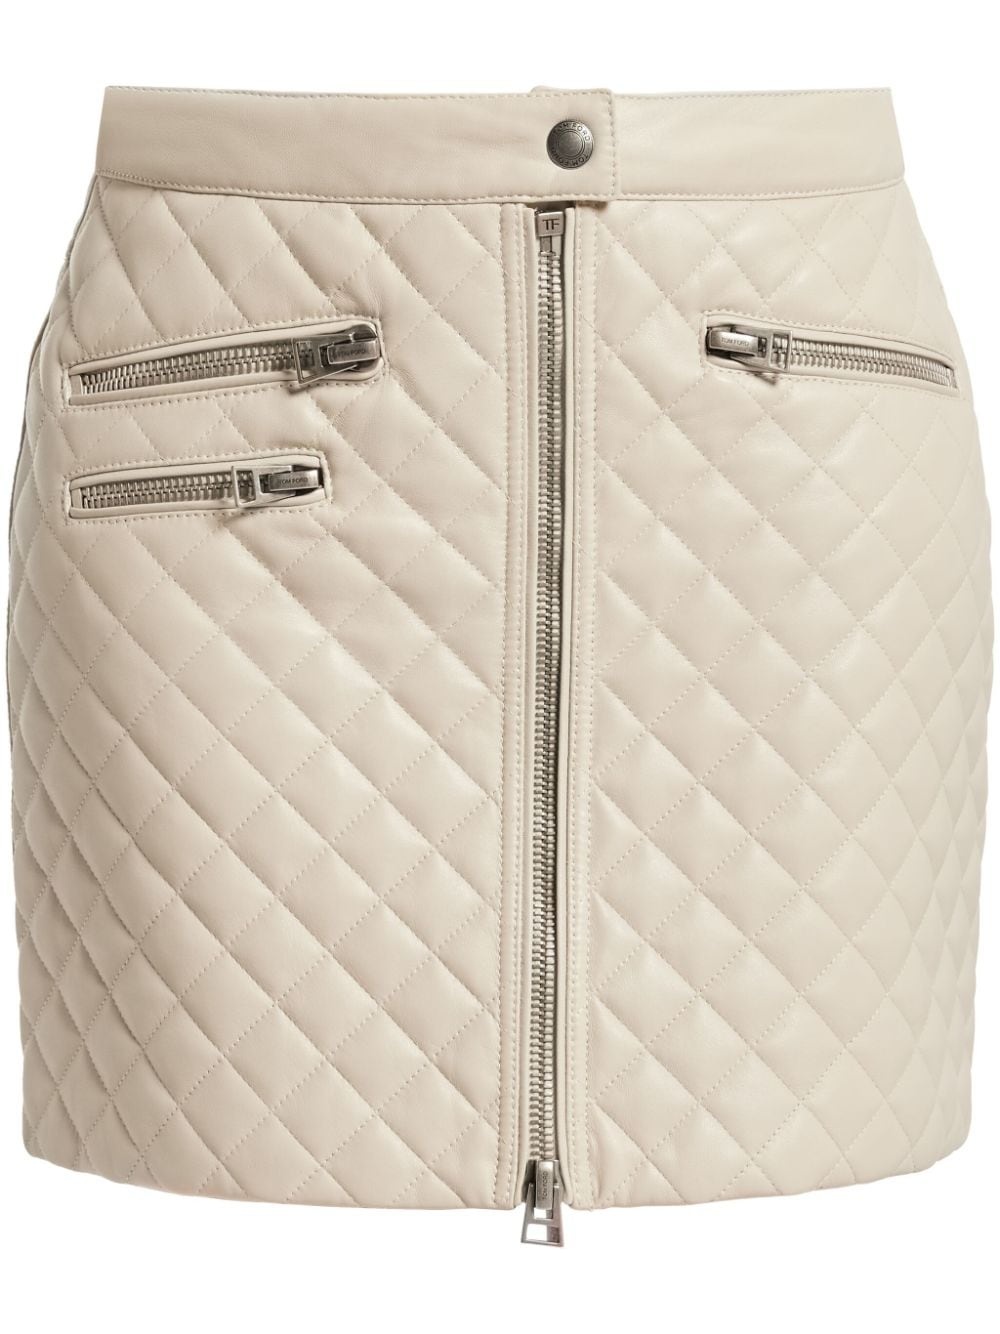 diamond-quilted leather miniskirt - 1